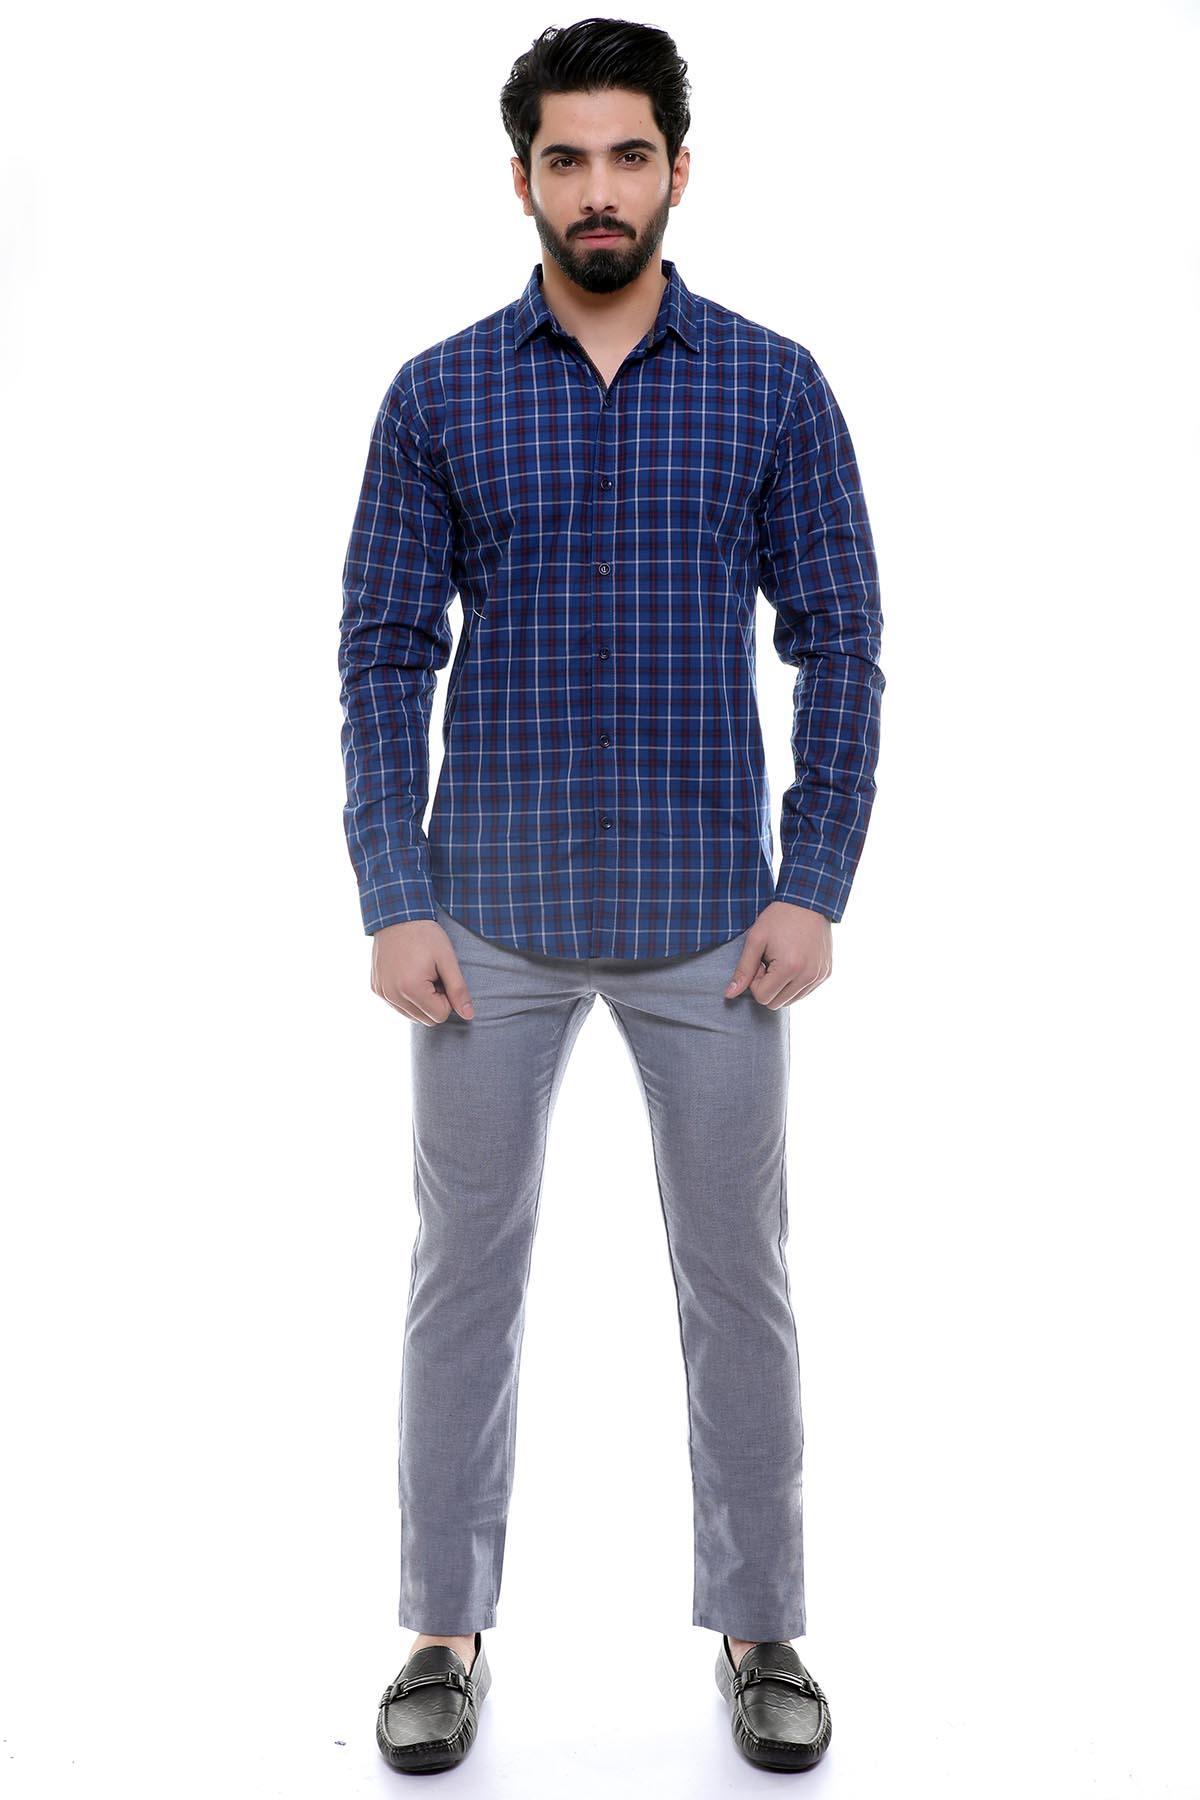 CASUAL SHIRT FULL SLEEVE BLUE CHECK SLIM FIT at Charcoal Clothing